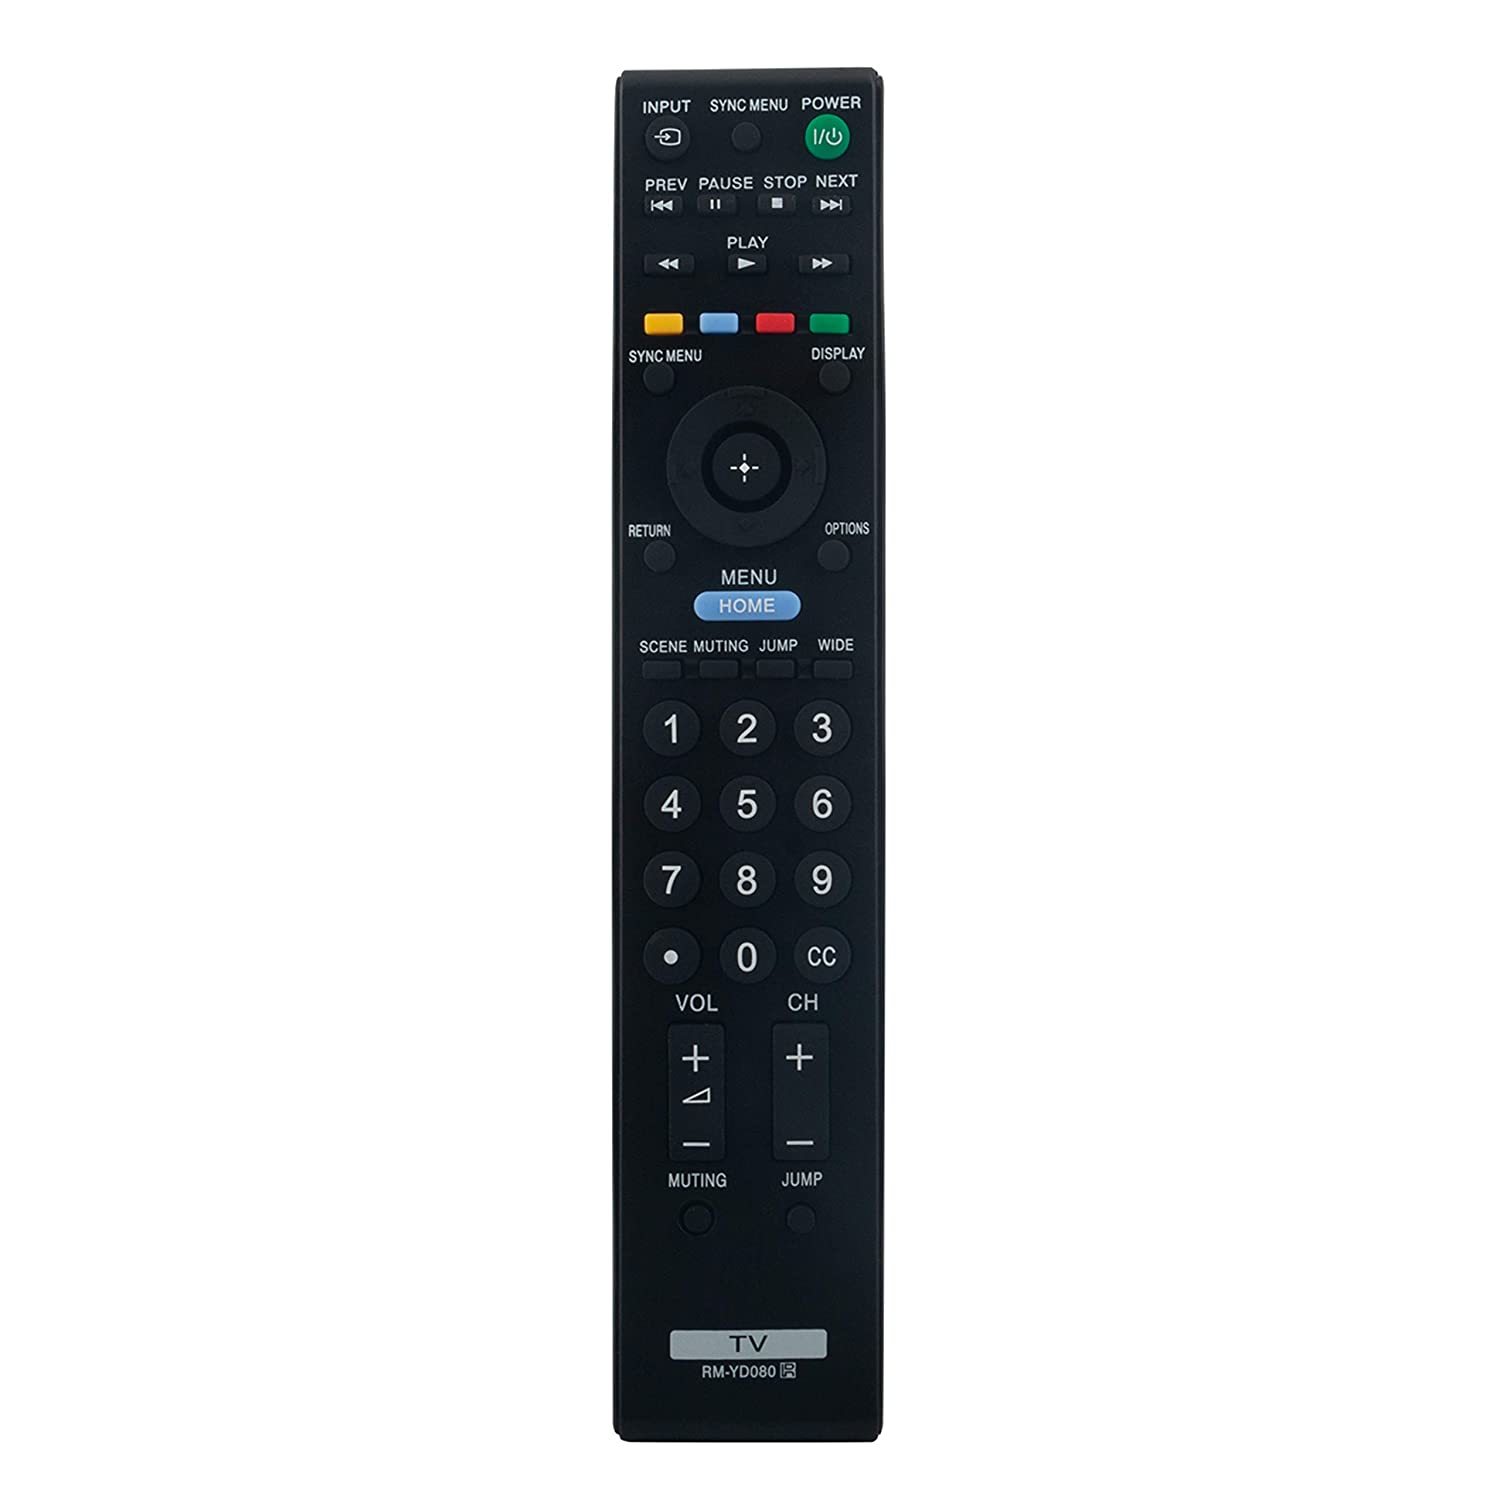 Rm-Yd080 Replaced Remote Fit For Sony Tv Kdl-40Bx450 Kdl-46Bx450 Kdl-22Ex350 ..